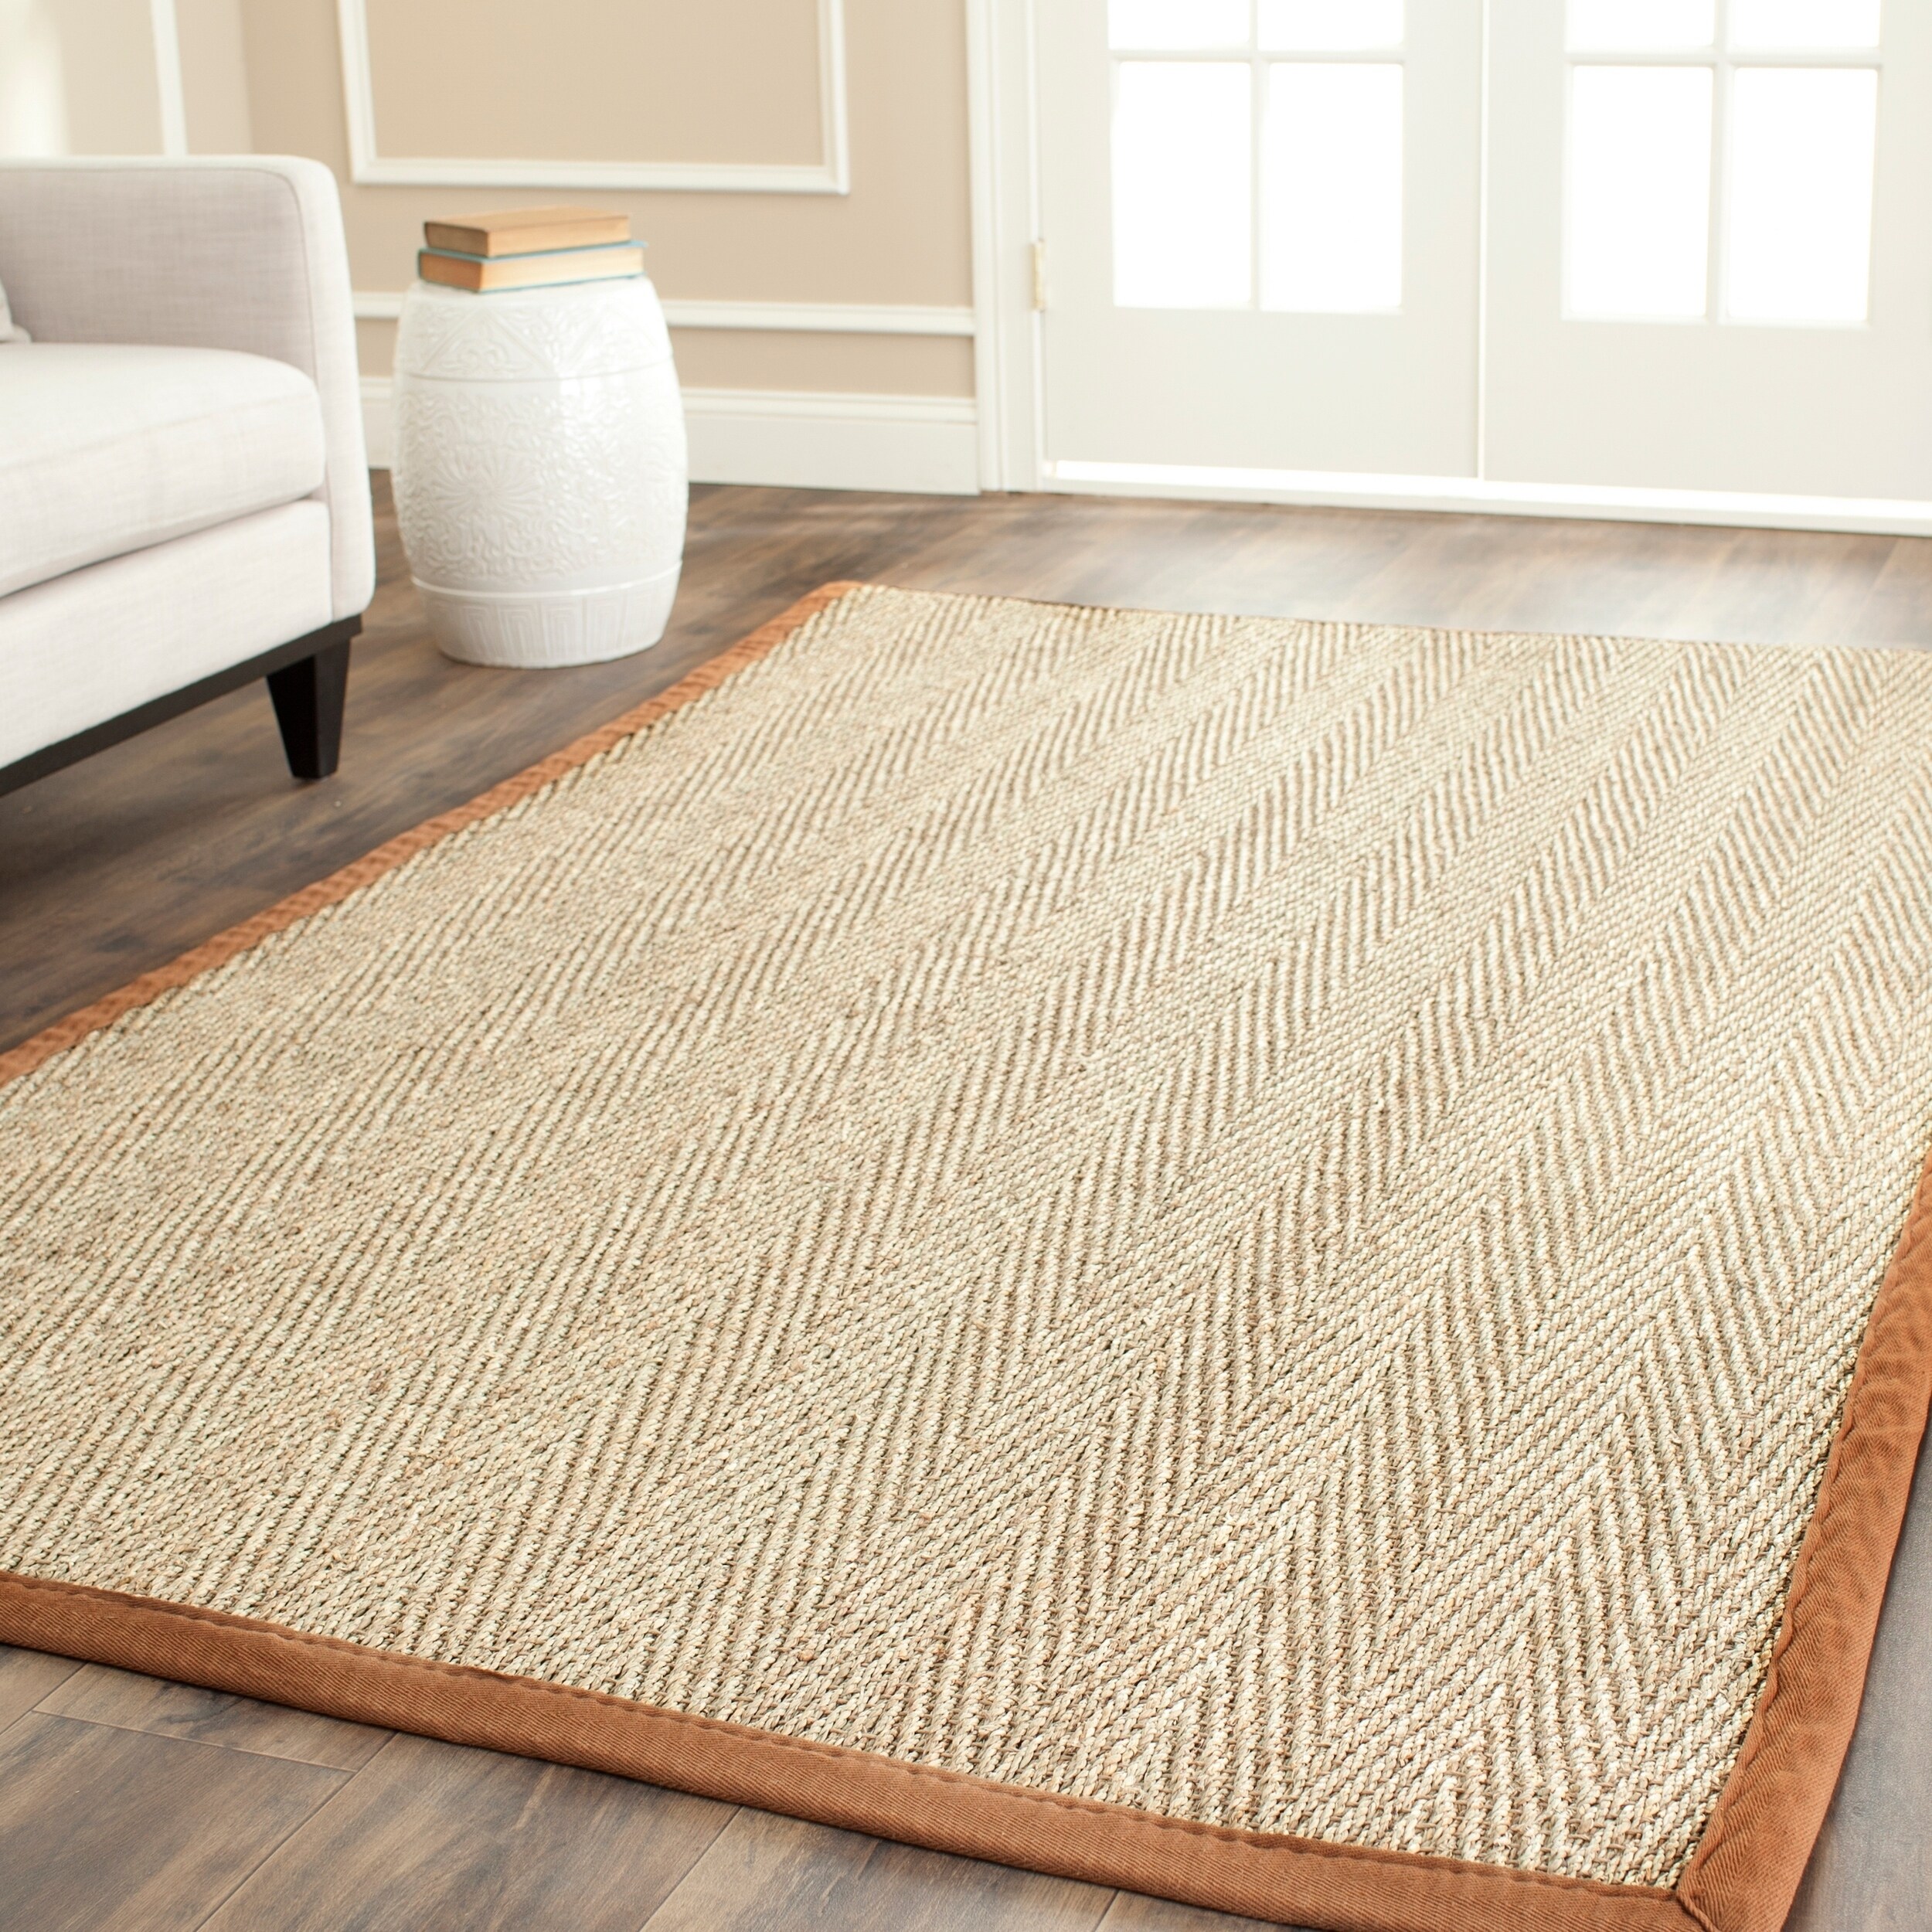 Seagrass Area Rugs Buy 7x9   10x14 Rugs, 5x8   6x9